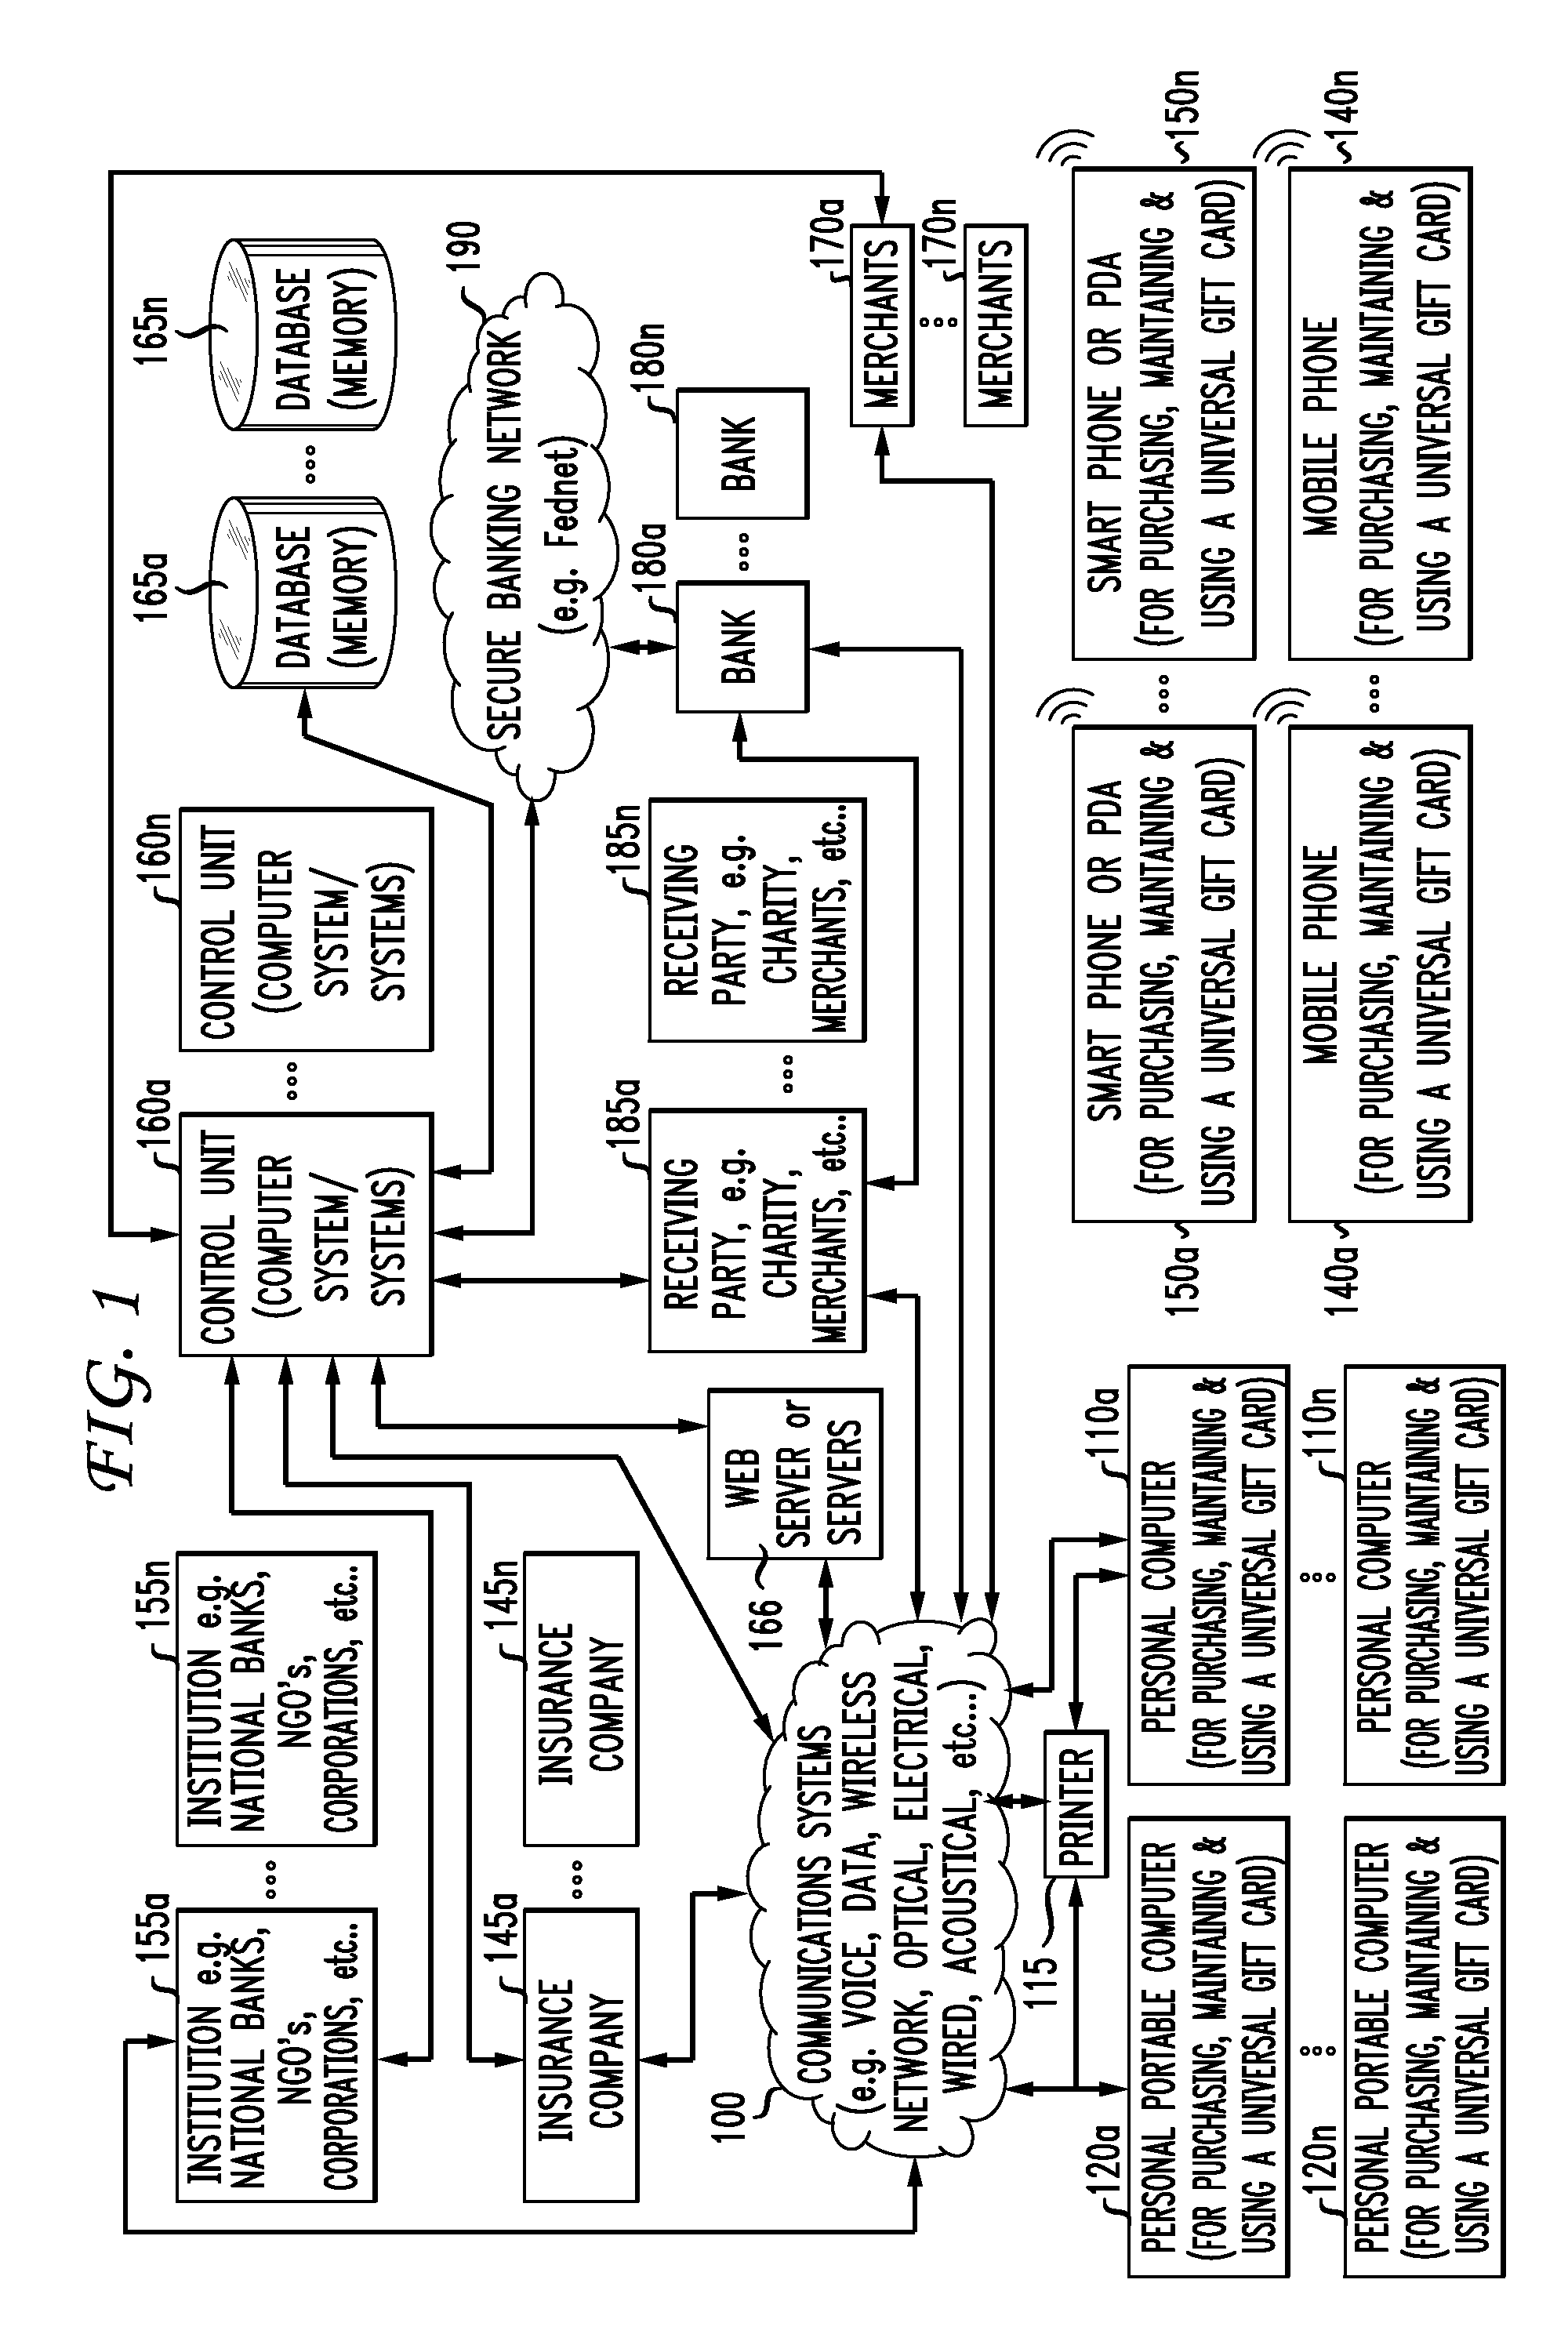 System and method facilitating purchase of goods and services by pre-payment via a universal gift or other pre-paid card with incentives